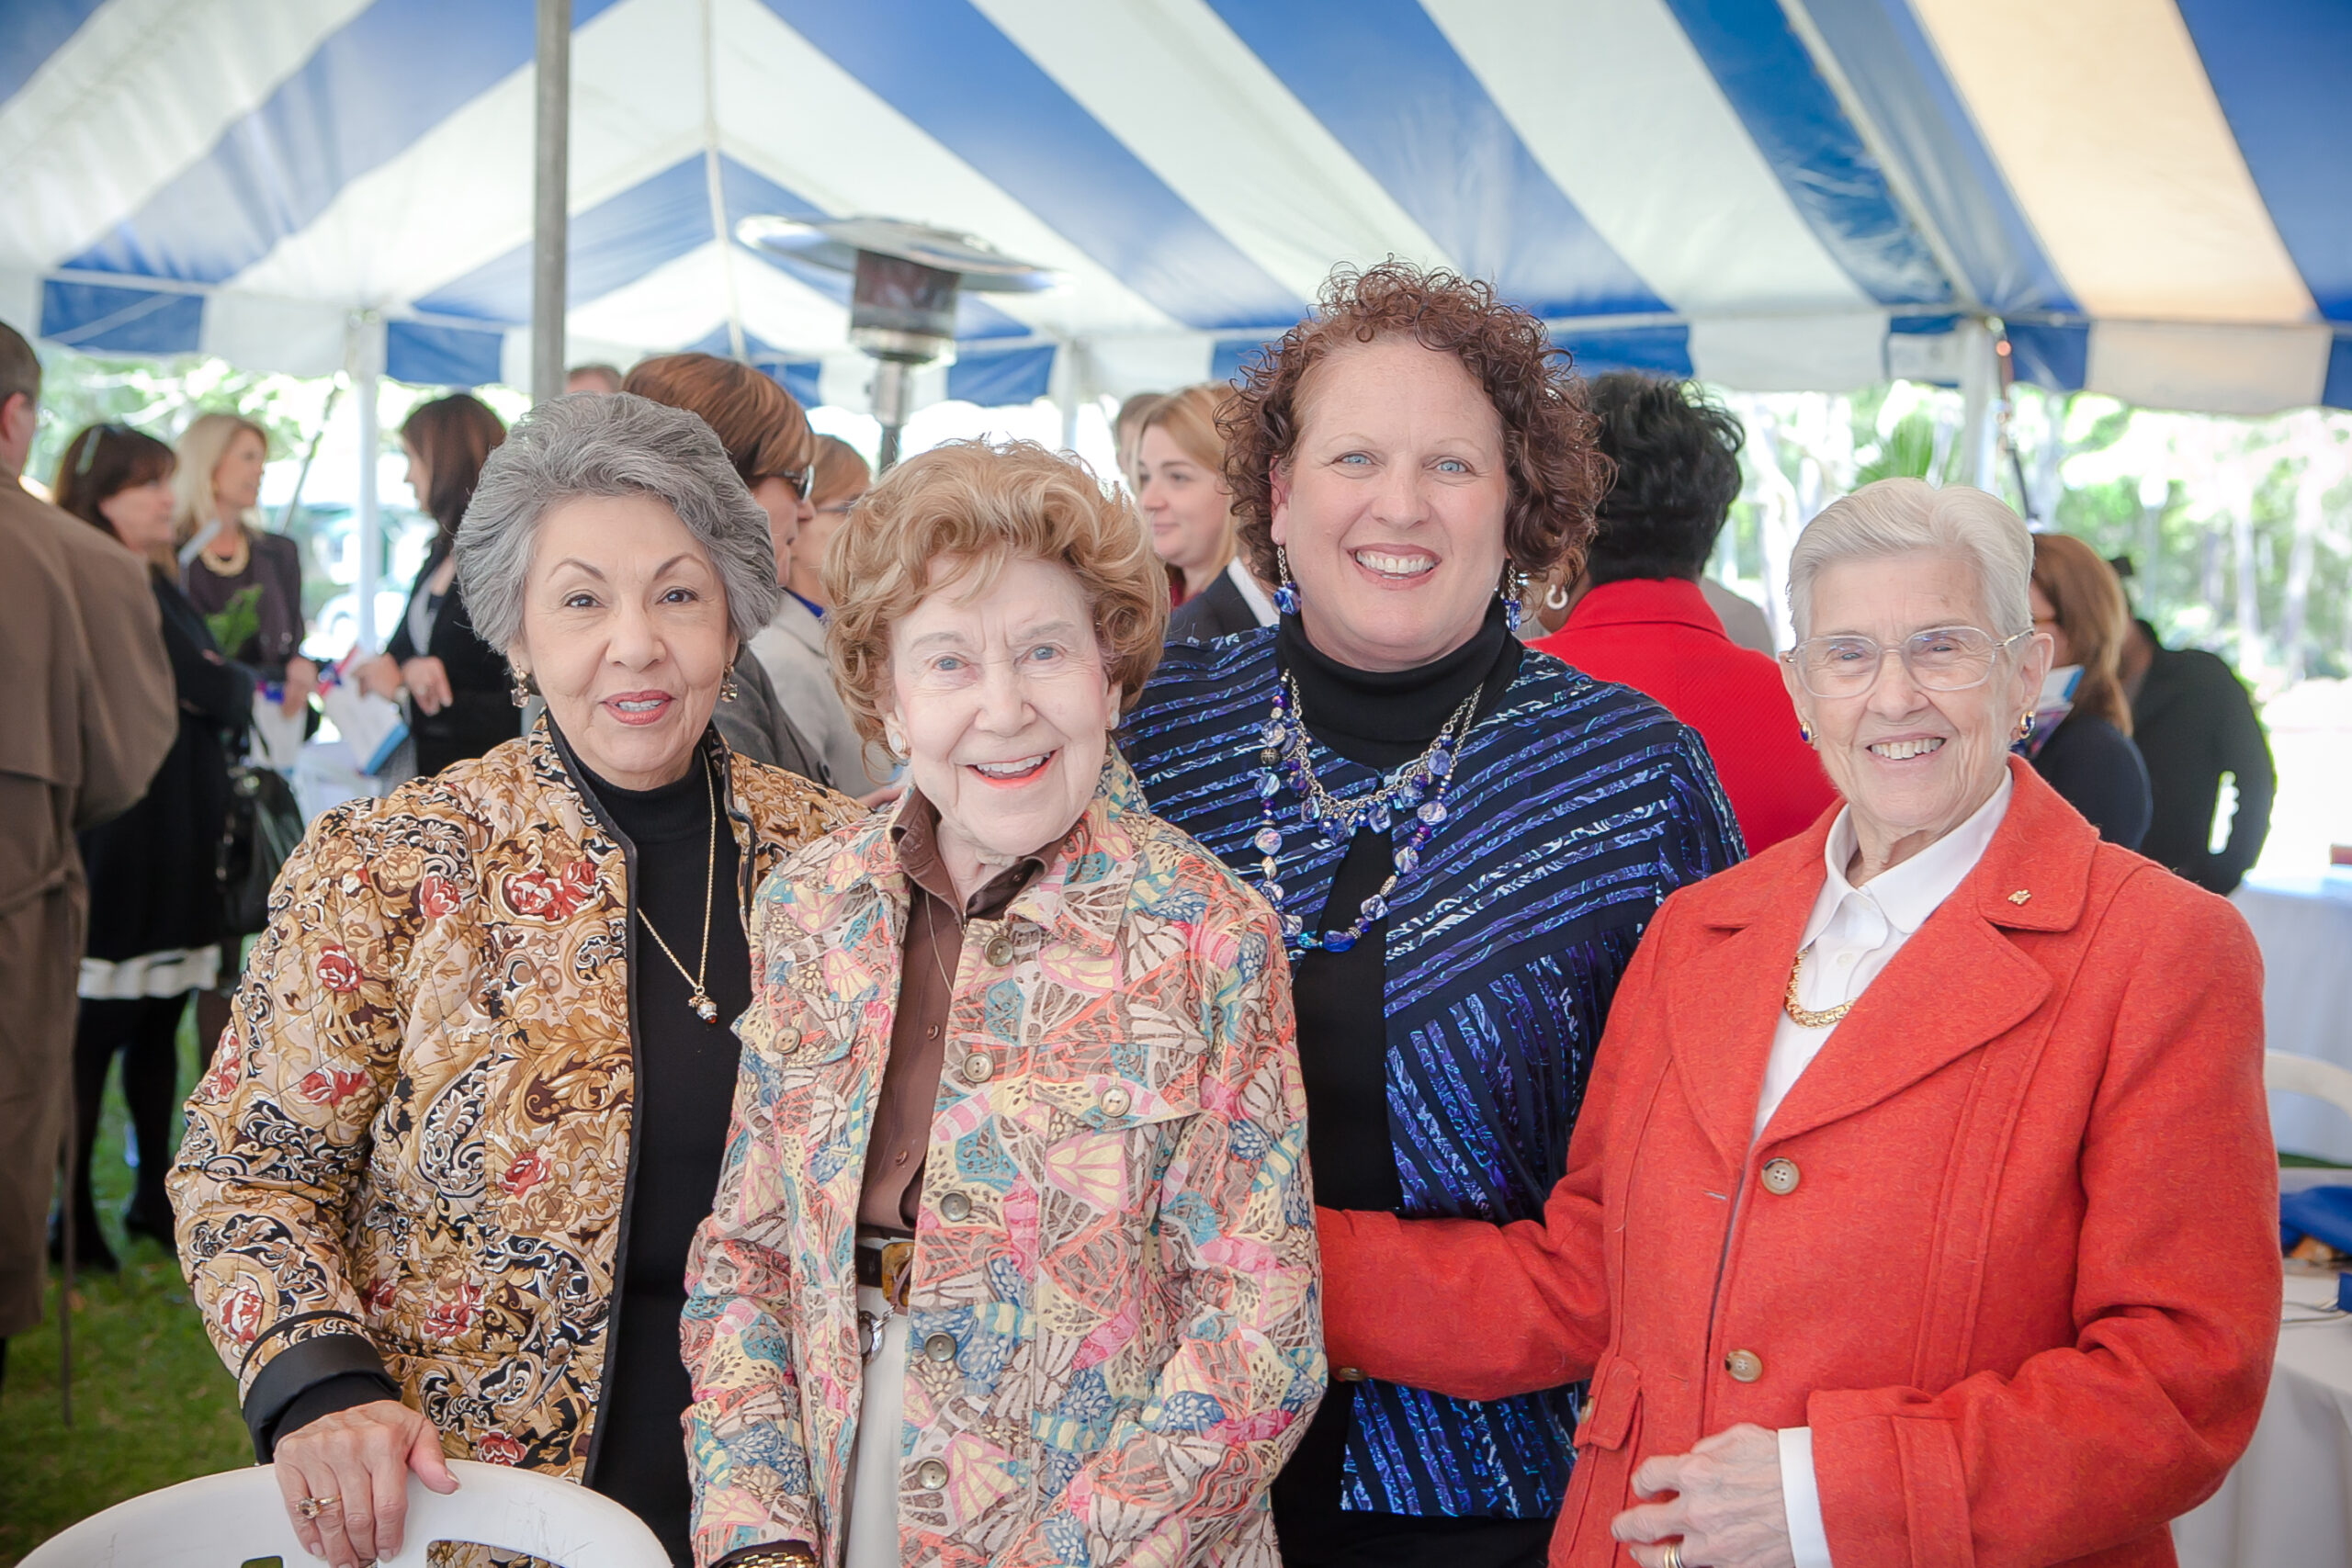 group of smiling women at event